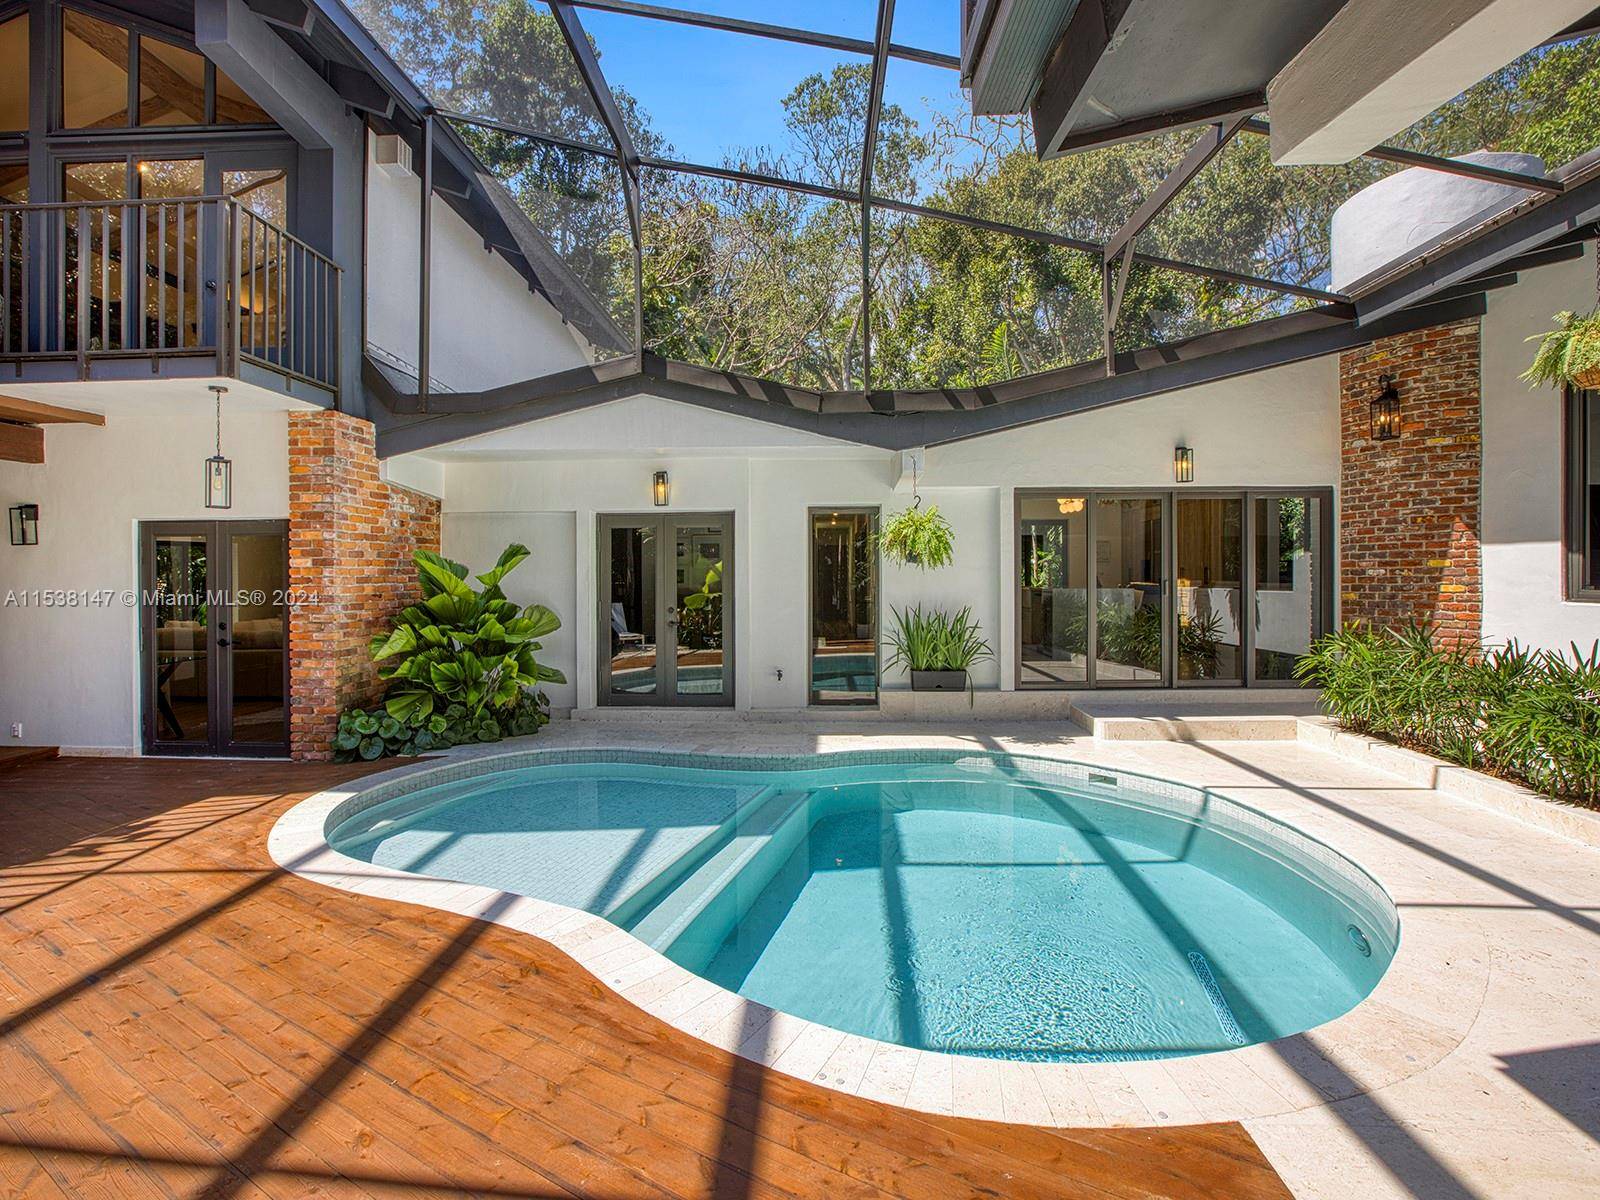 Contemporary haven within the exclusive enclave of Devonwood Pinecrest, this turnkey 5 bedroom 4 bathroom home is nestled amidst a captivating landscape and enclosed by lush trees.